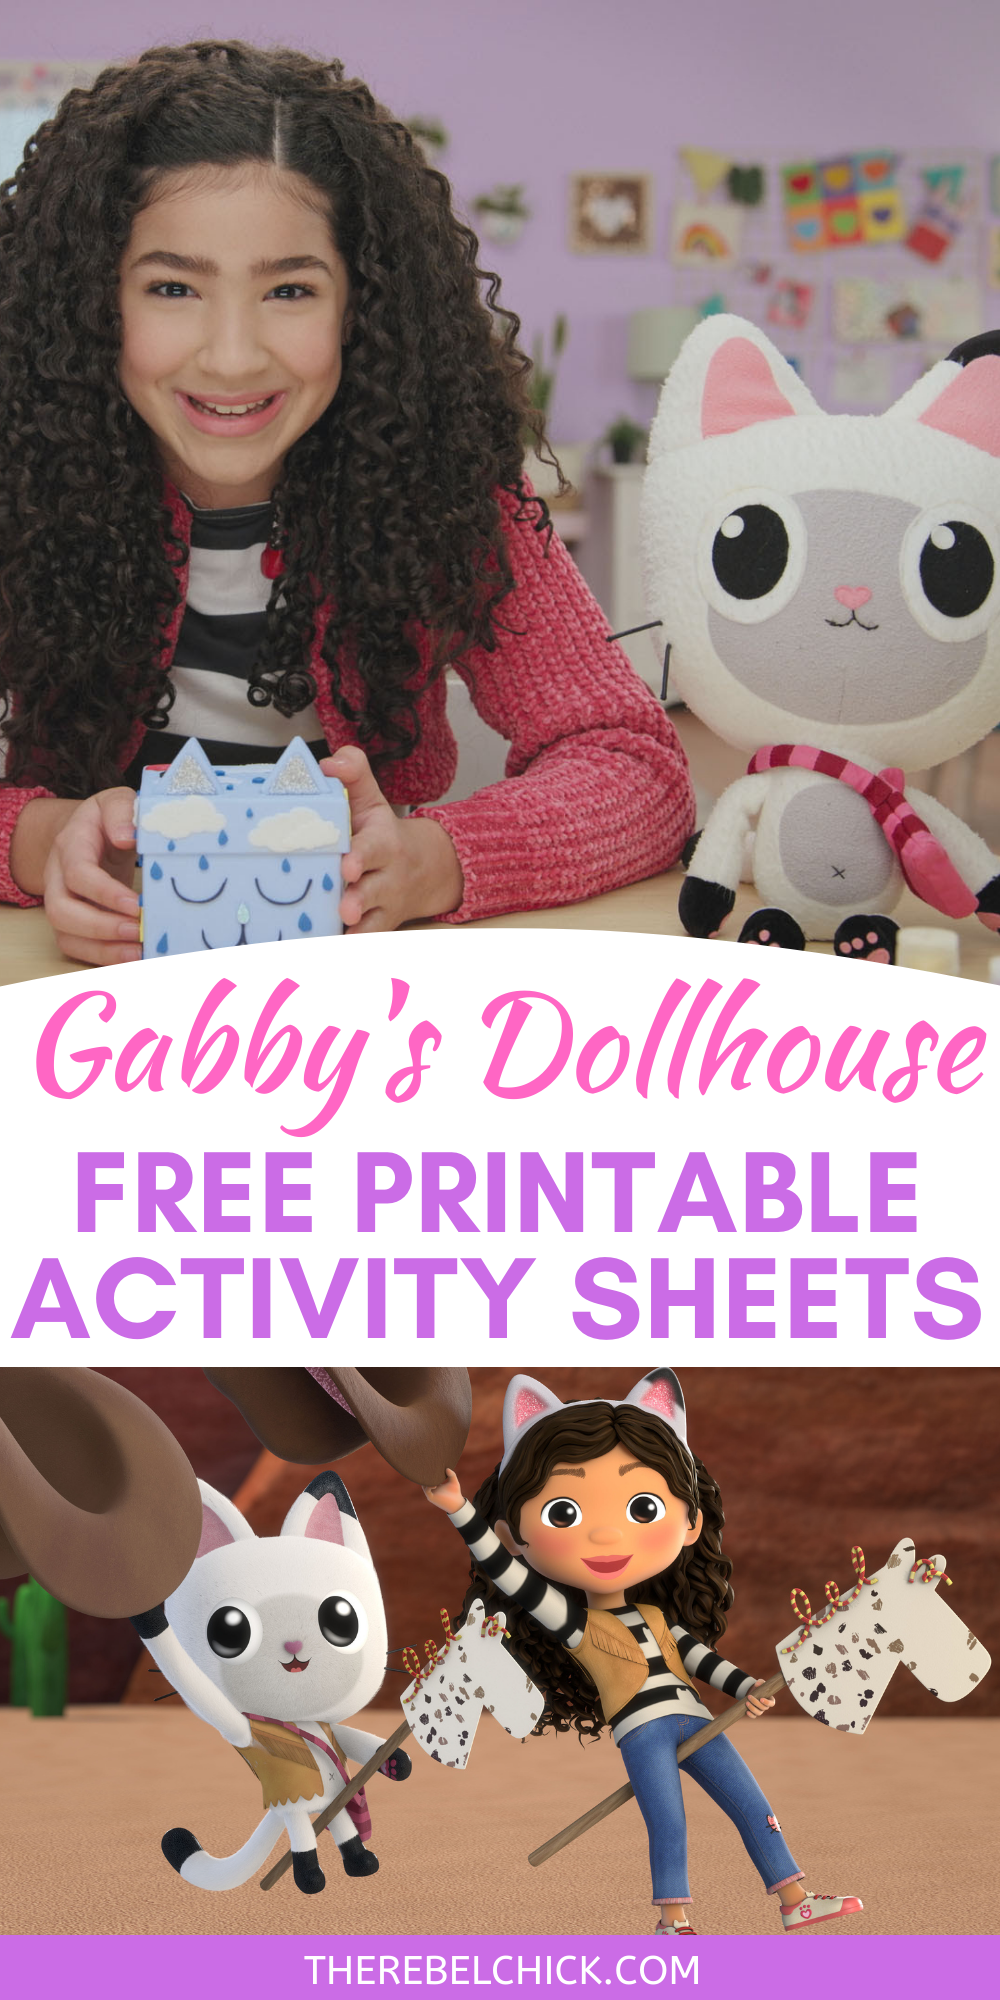 Get creative this weekend and enjoy these Gabby's Dollhouse Free Printable Activity Sheets!